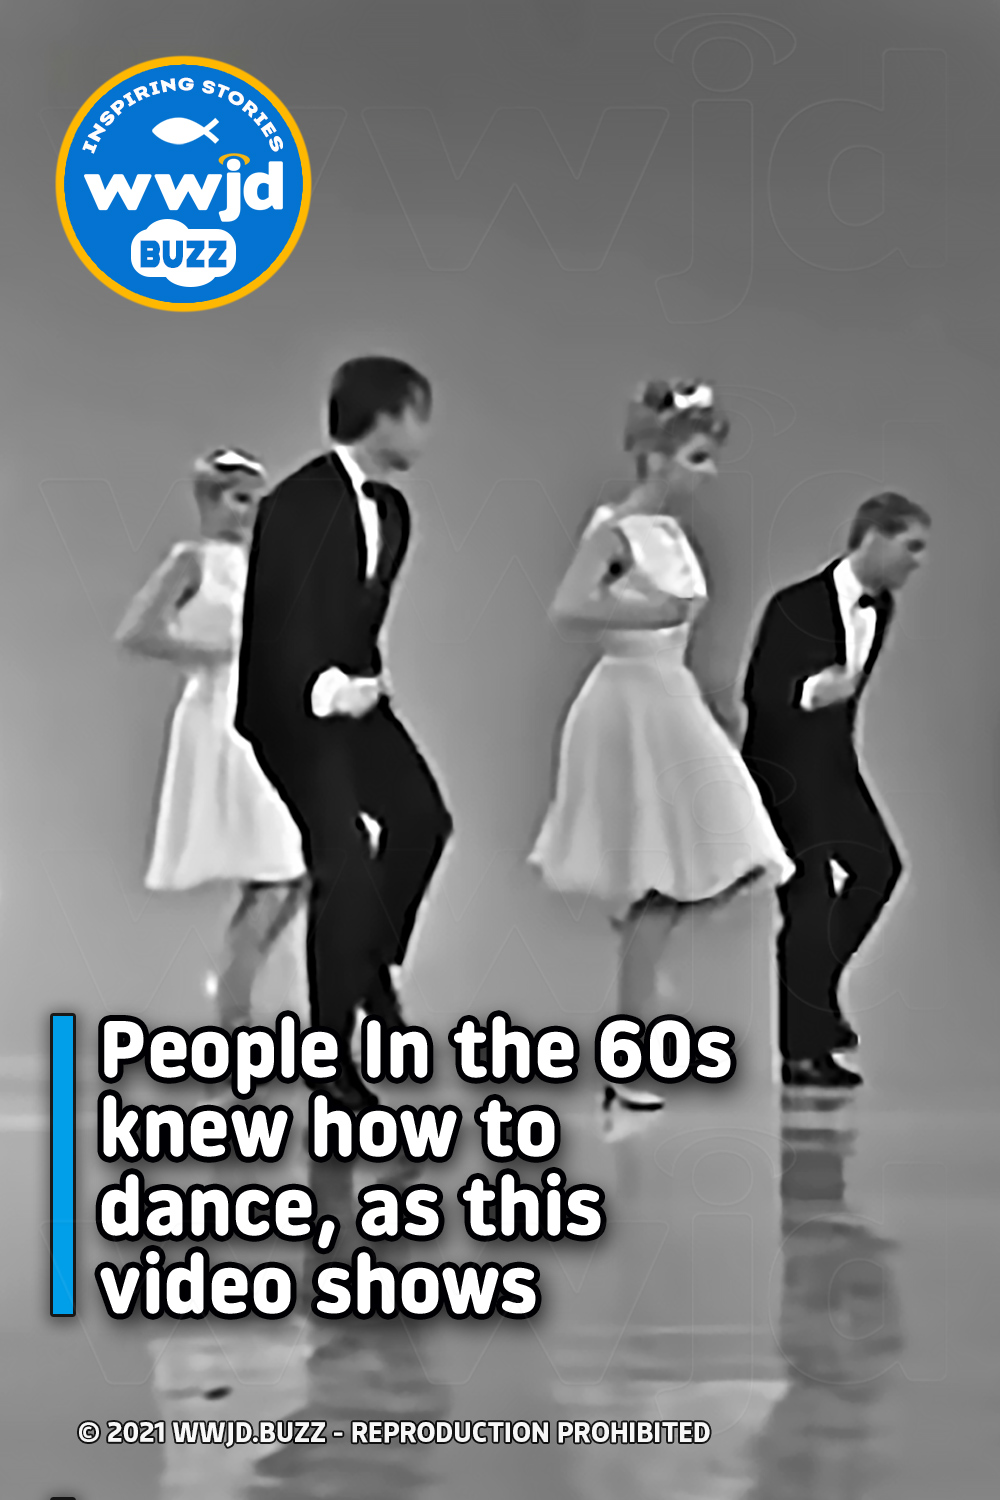 Your grandma and grandpa knew how to dance, as this video shows!